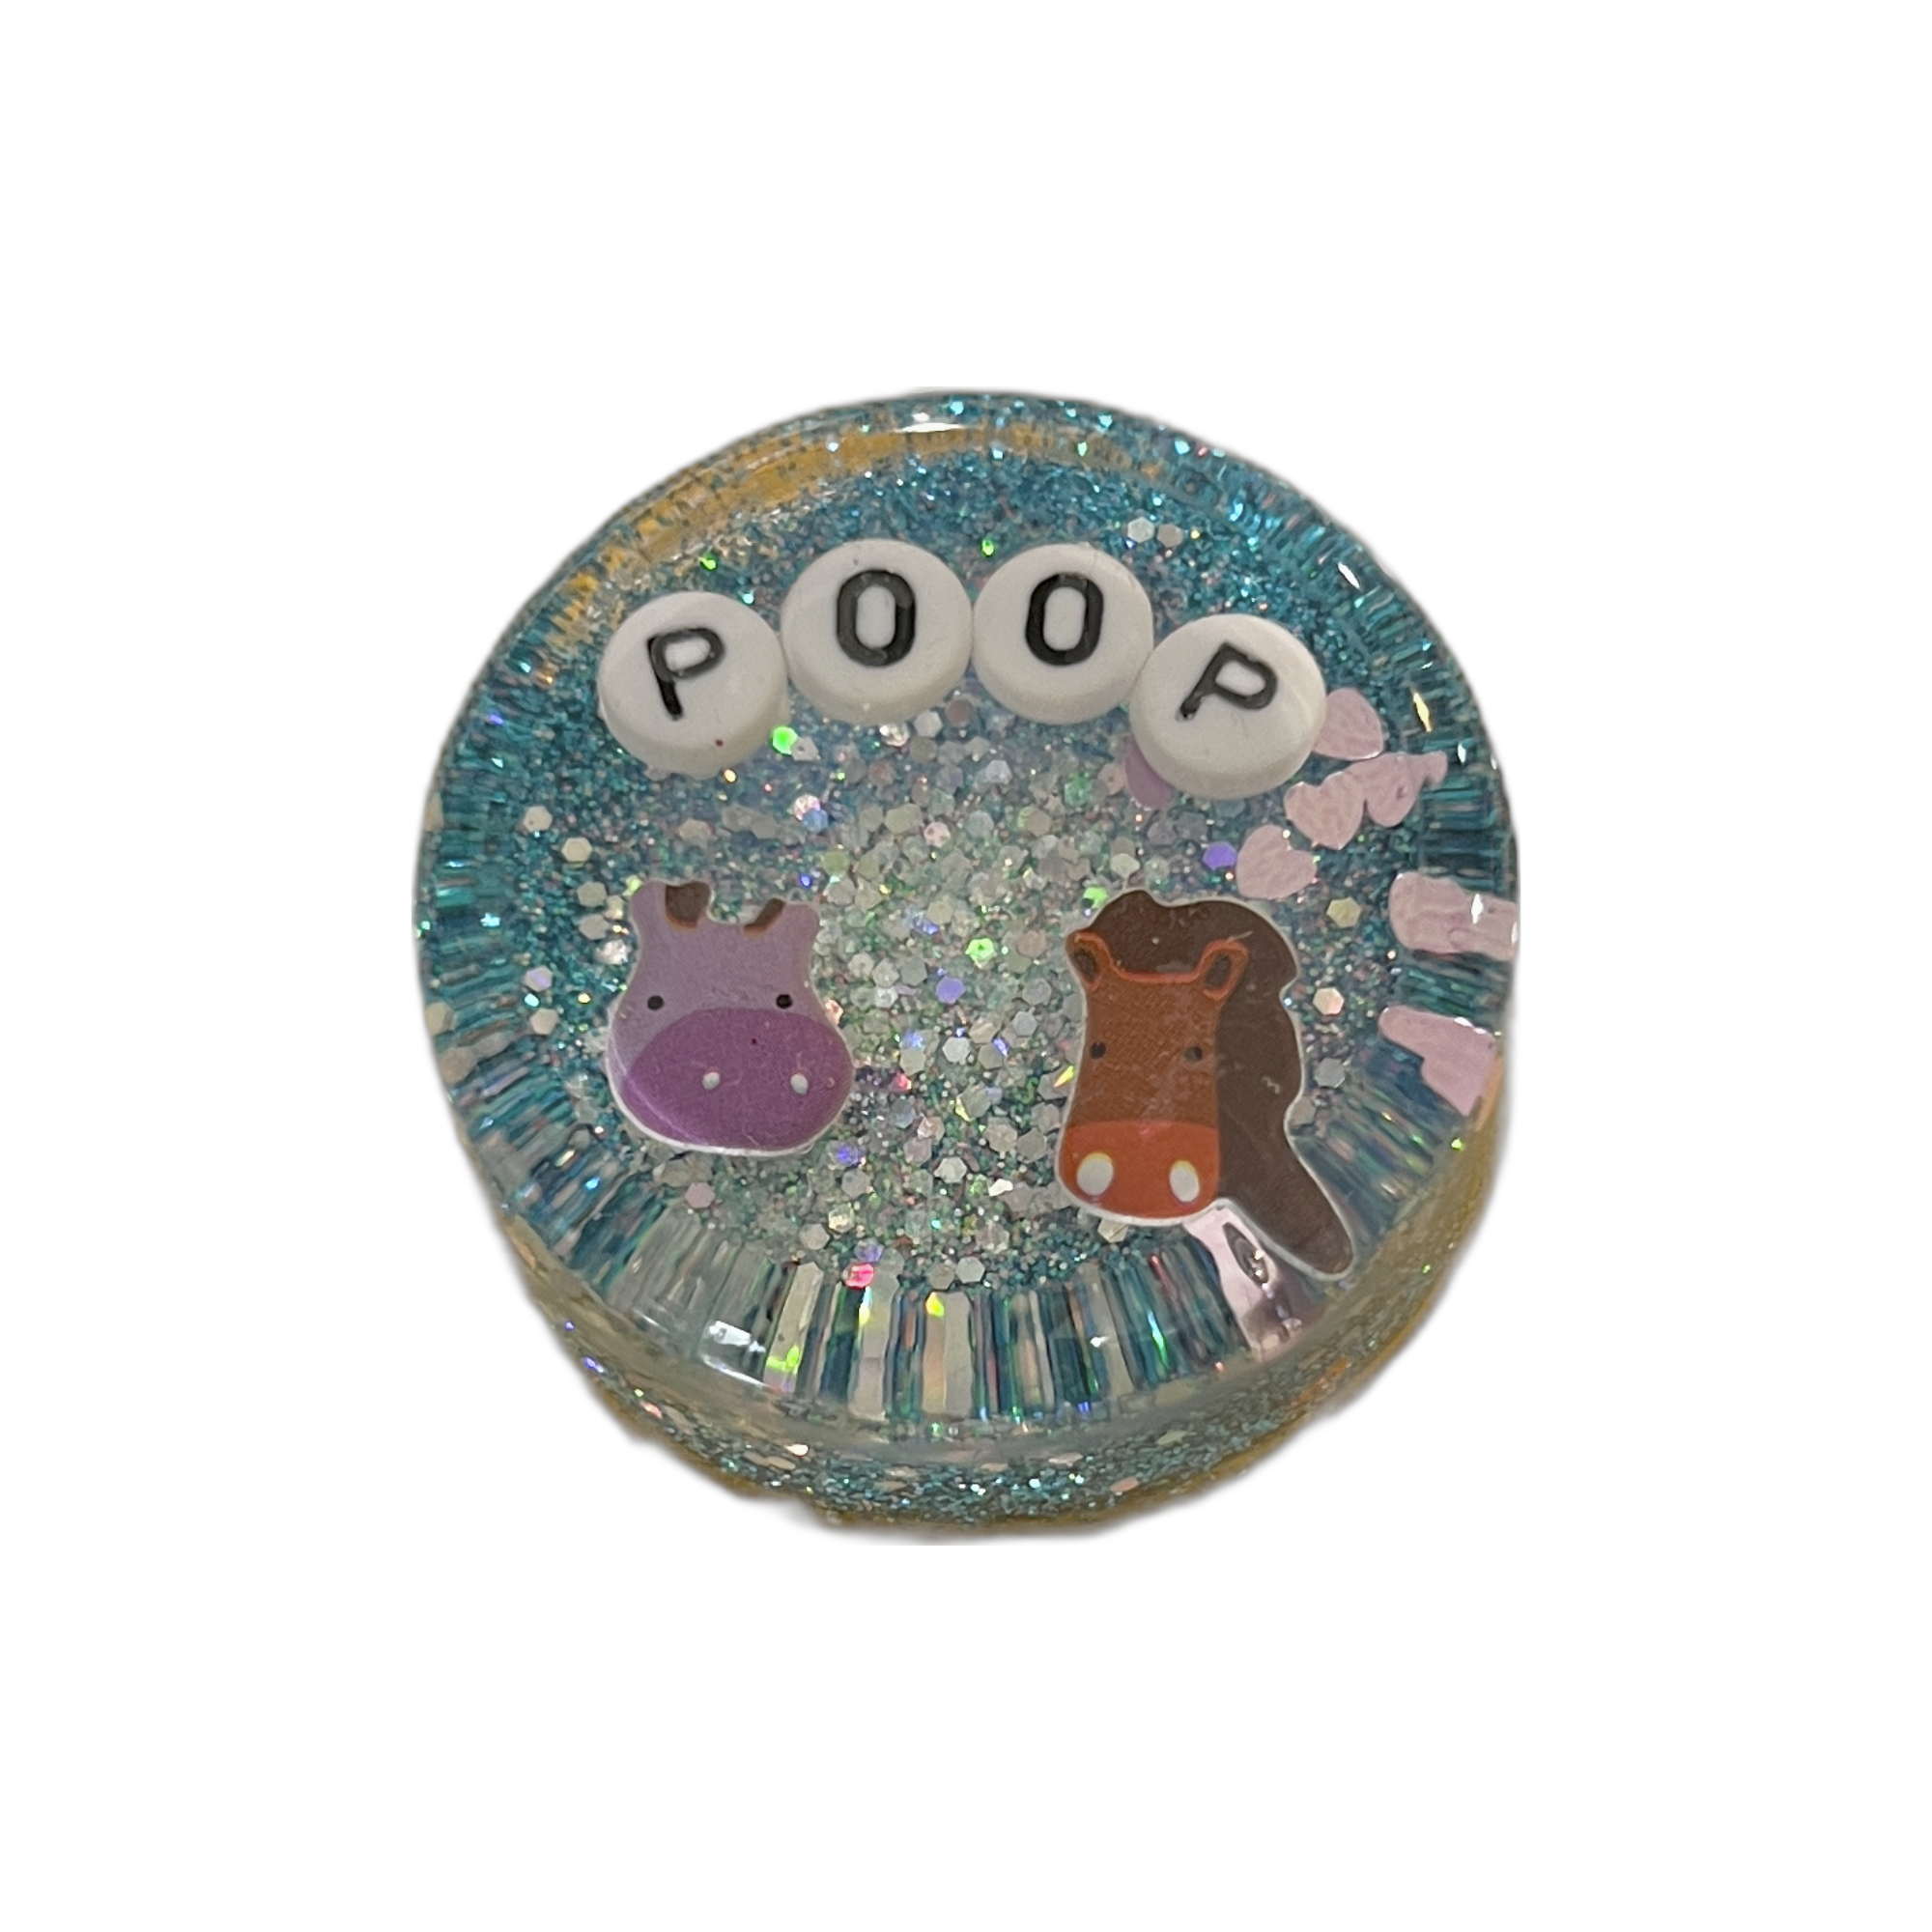 Poop - Shower Art - READY TO SHIP